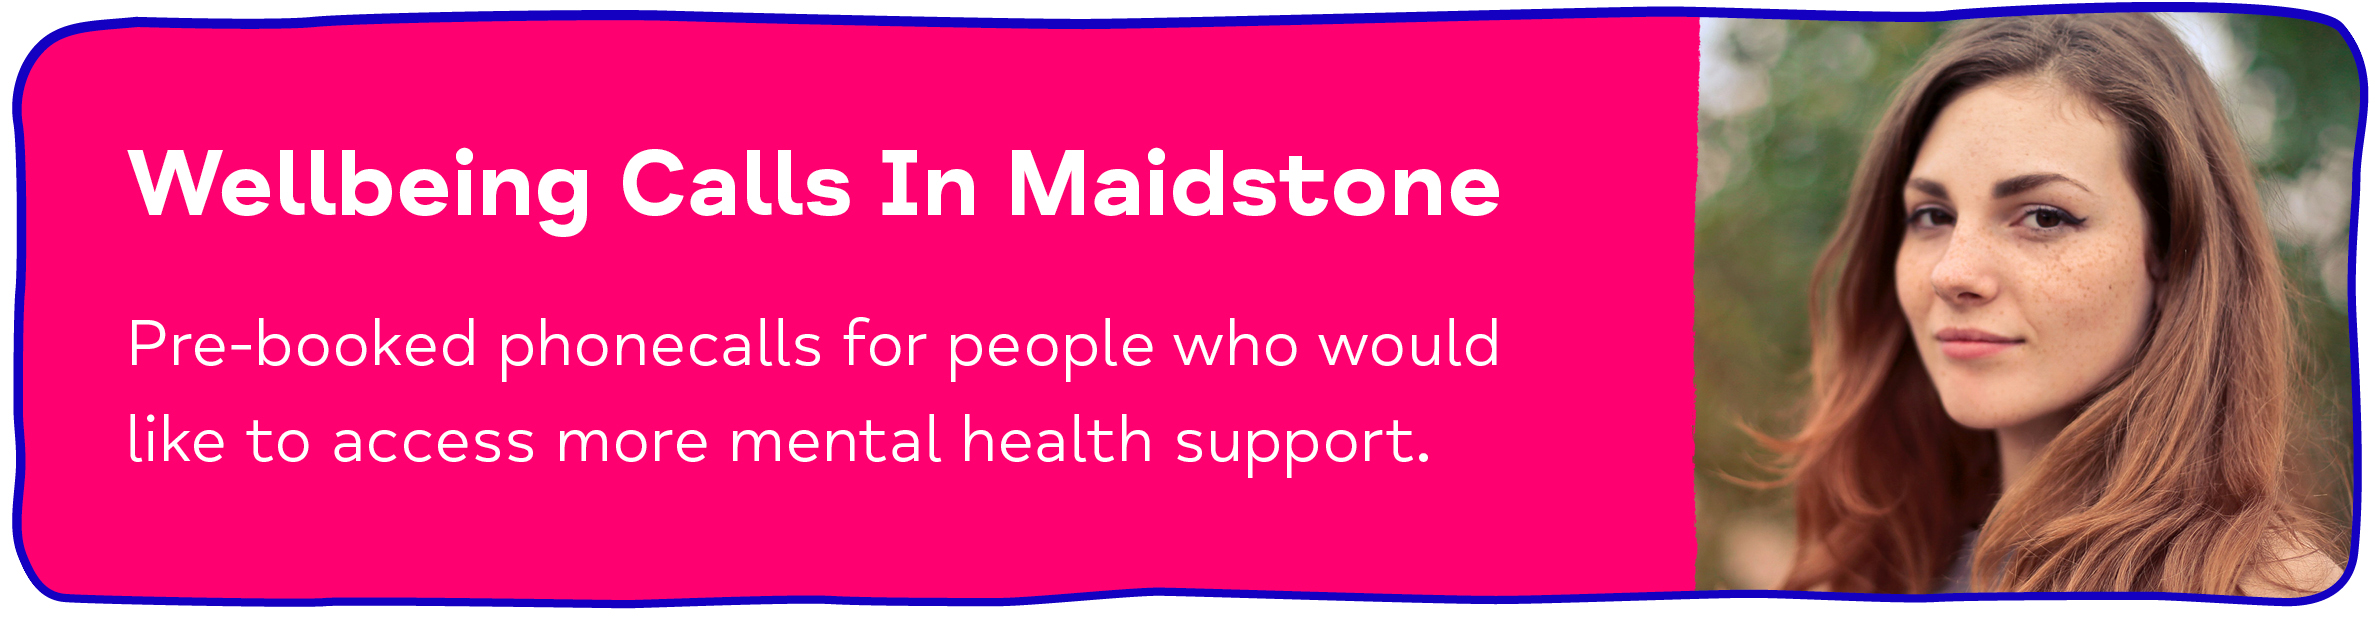 Wellbeing Calls In Maidstone. Pre-booked phonecalls for people who would like to access more mental health support.